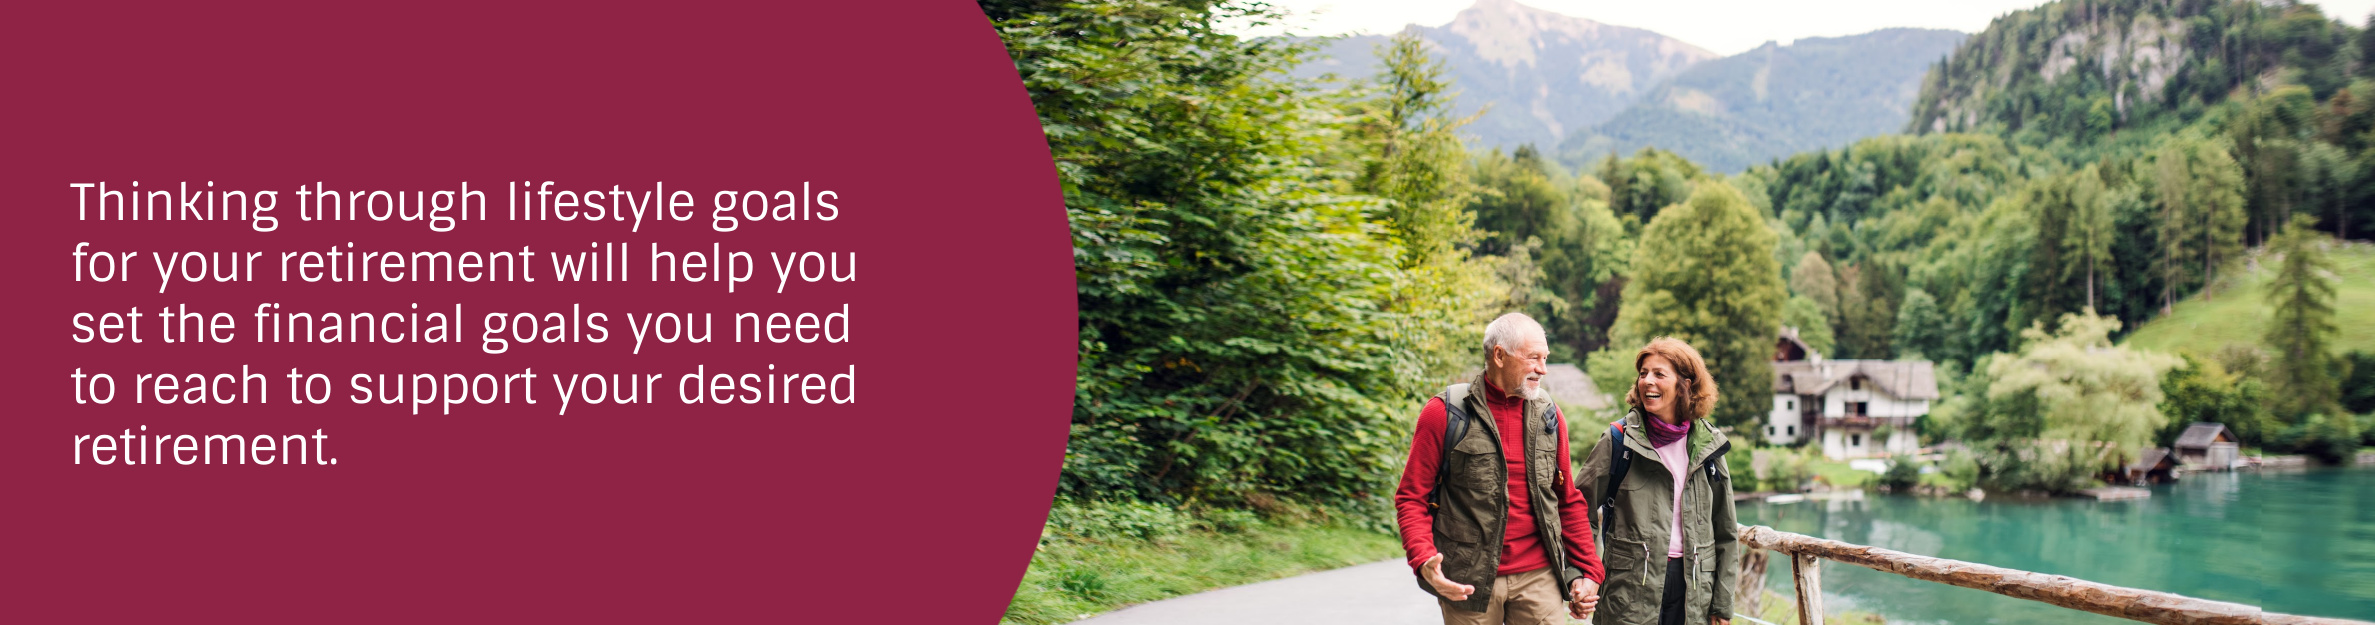 Photo: Couple walking by the mountains
Text: Thinking through lifestyle goals for your retirement will help you set the financial goals you need to reach to support your desired retirement.